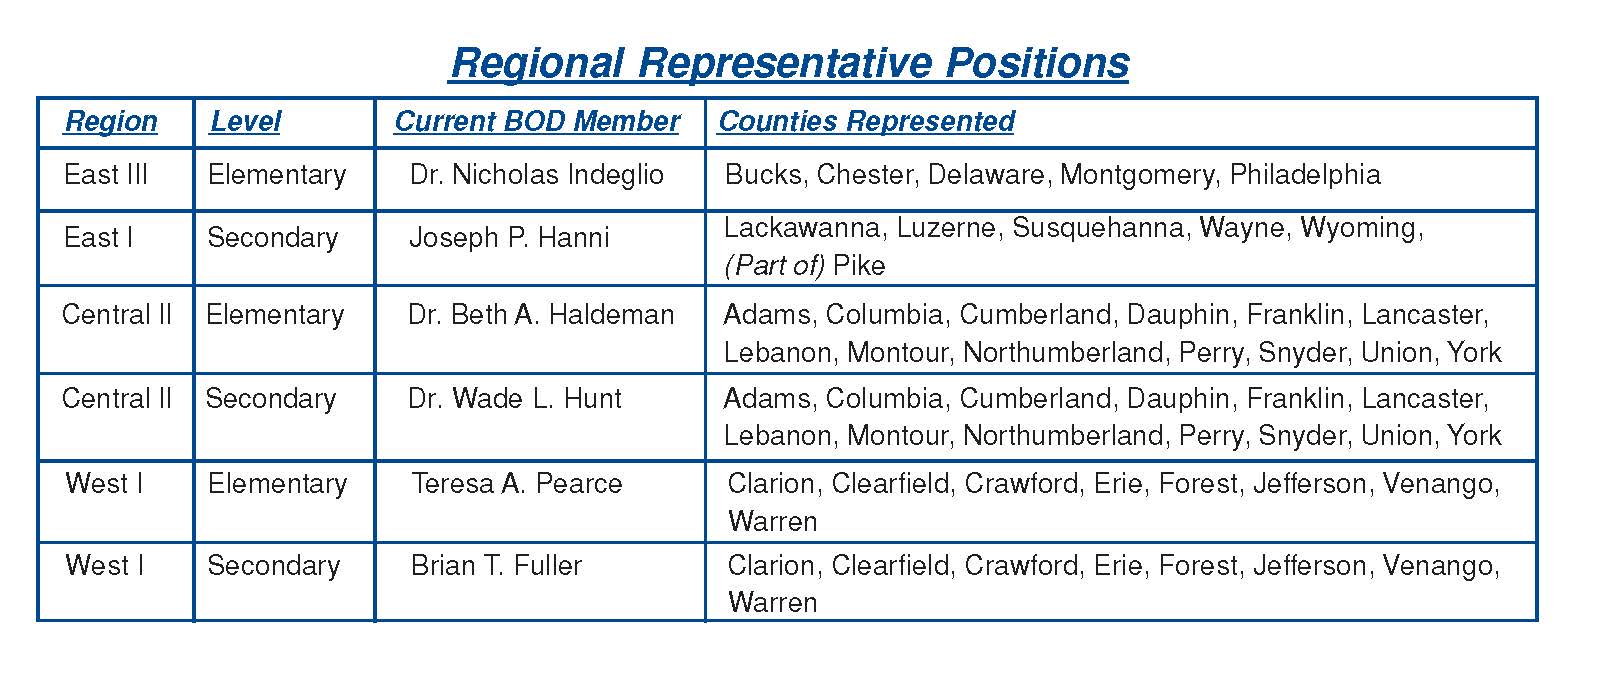 regional reps in 2020 election